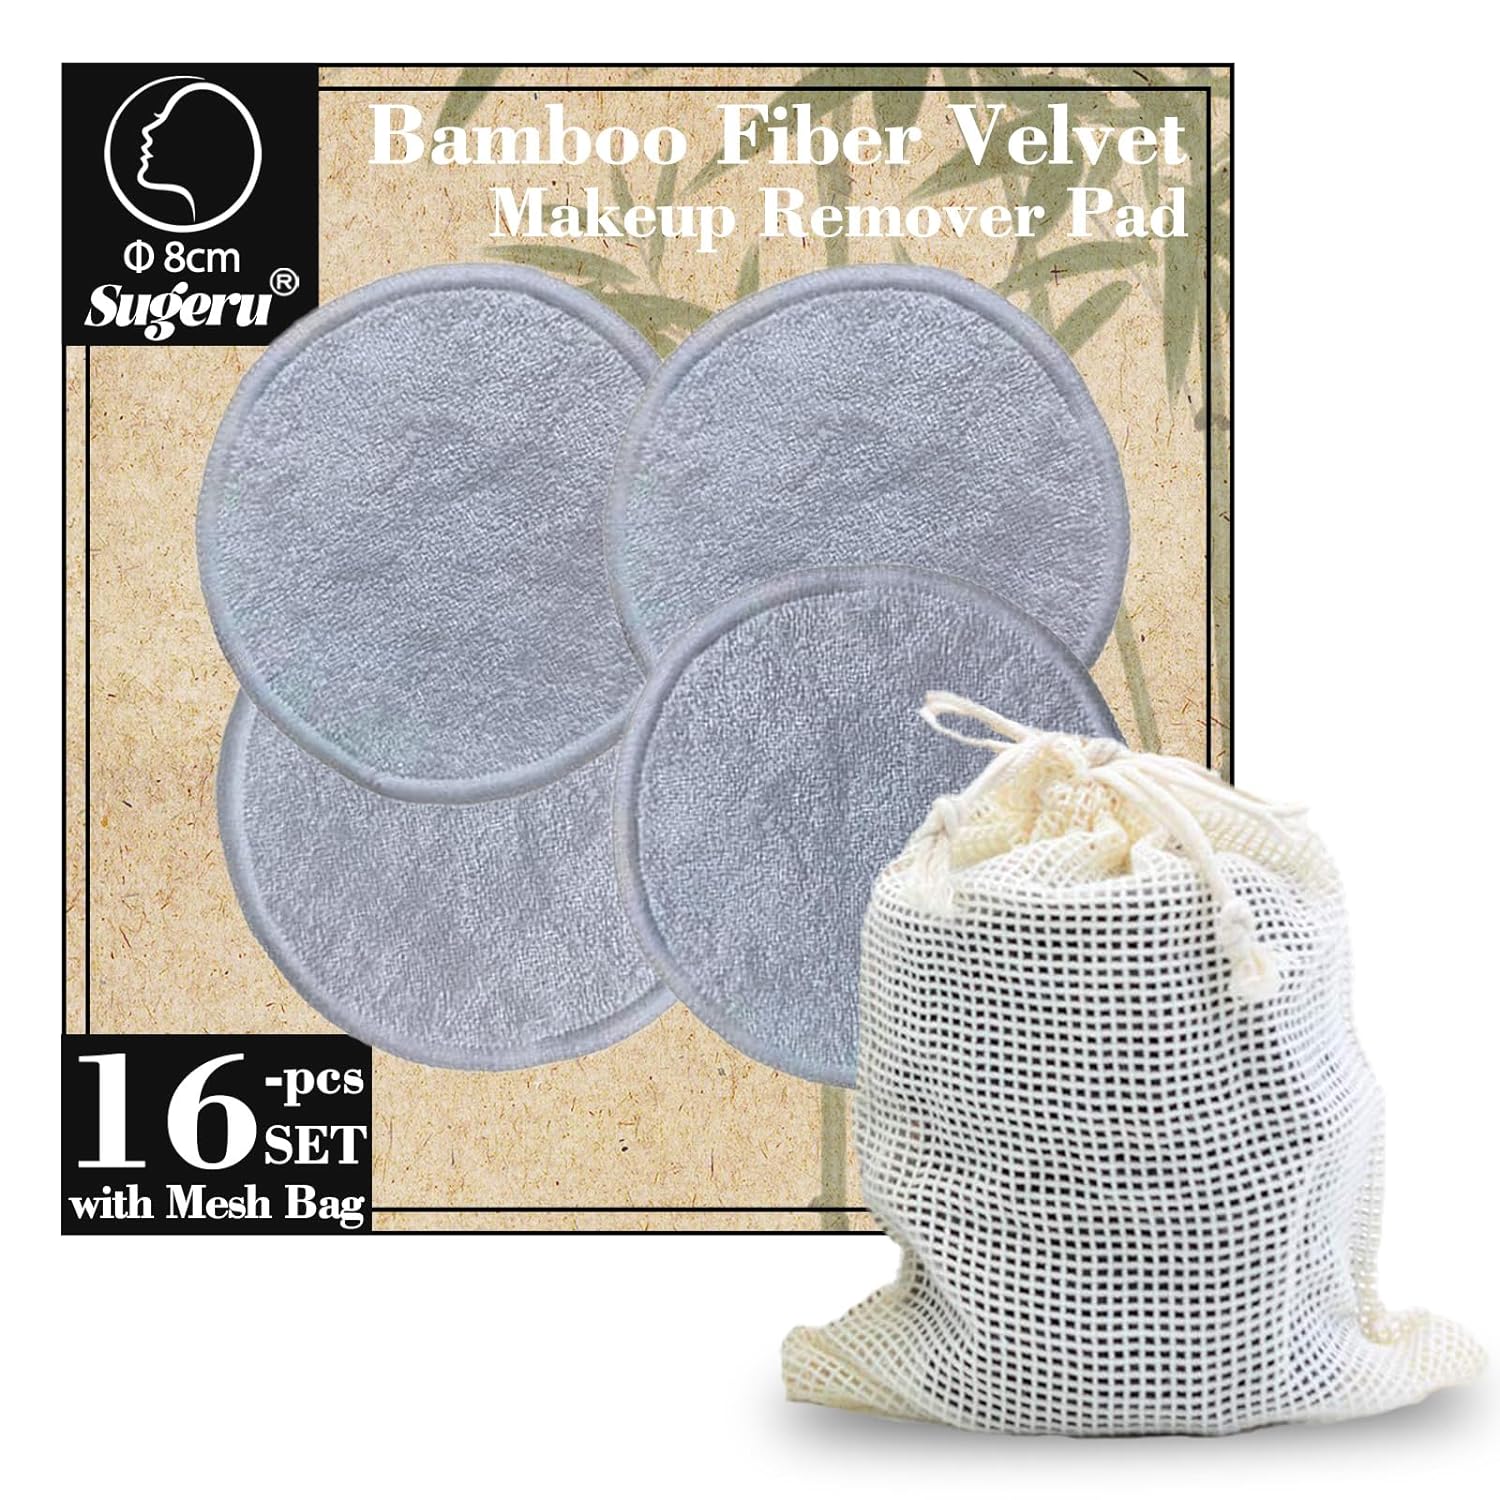 Sugeru® 16 pieces make-up pads made of bamboo fiber, reusable, washable with laundry bag, reusable cotton pads, make-up wipes for most skin types, make-up remover pads, skin-friendly, soft (grey)